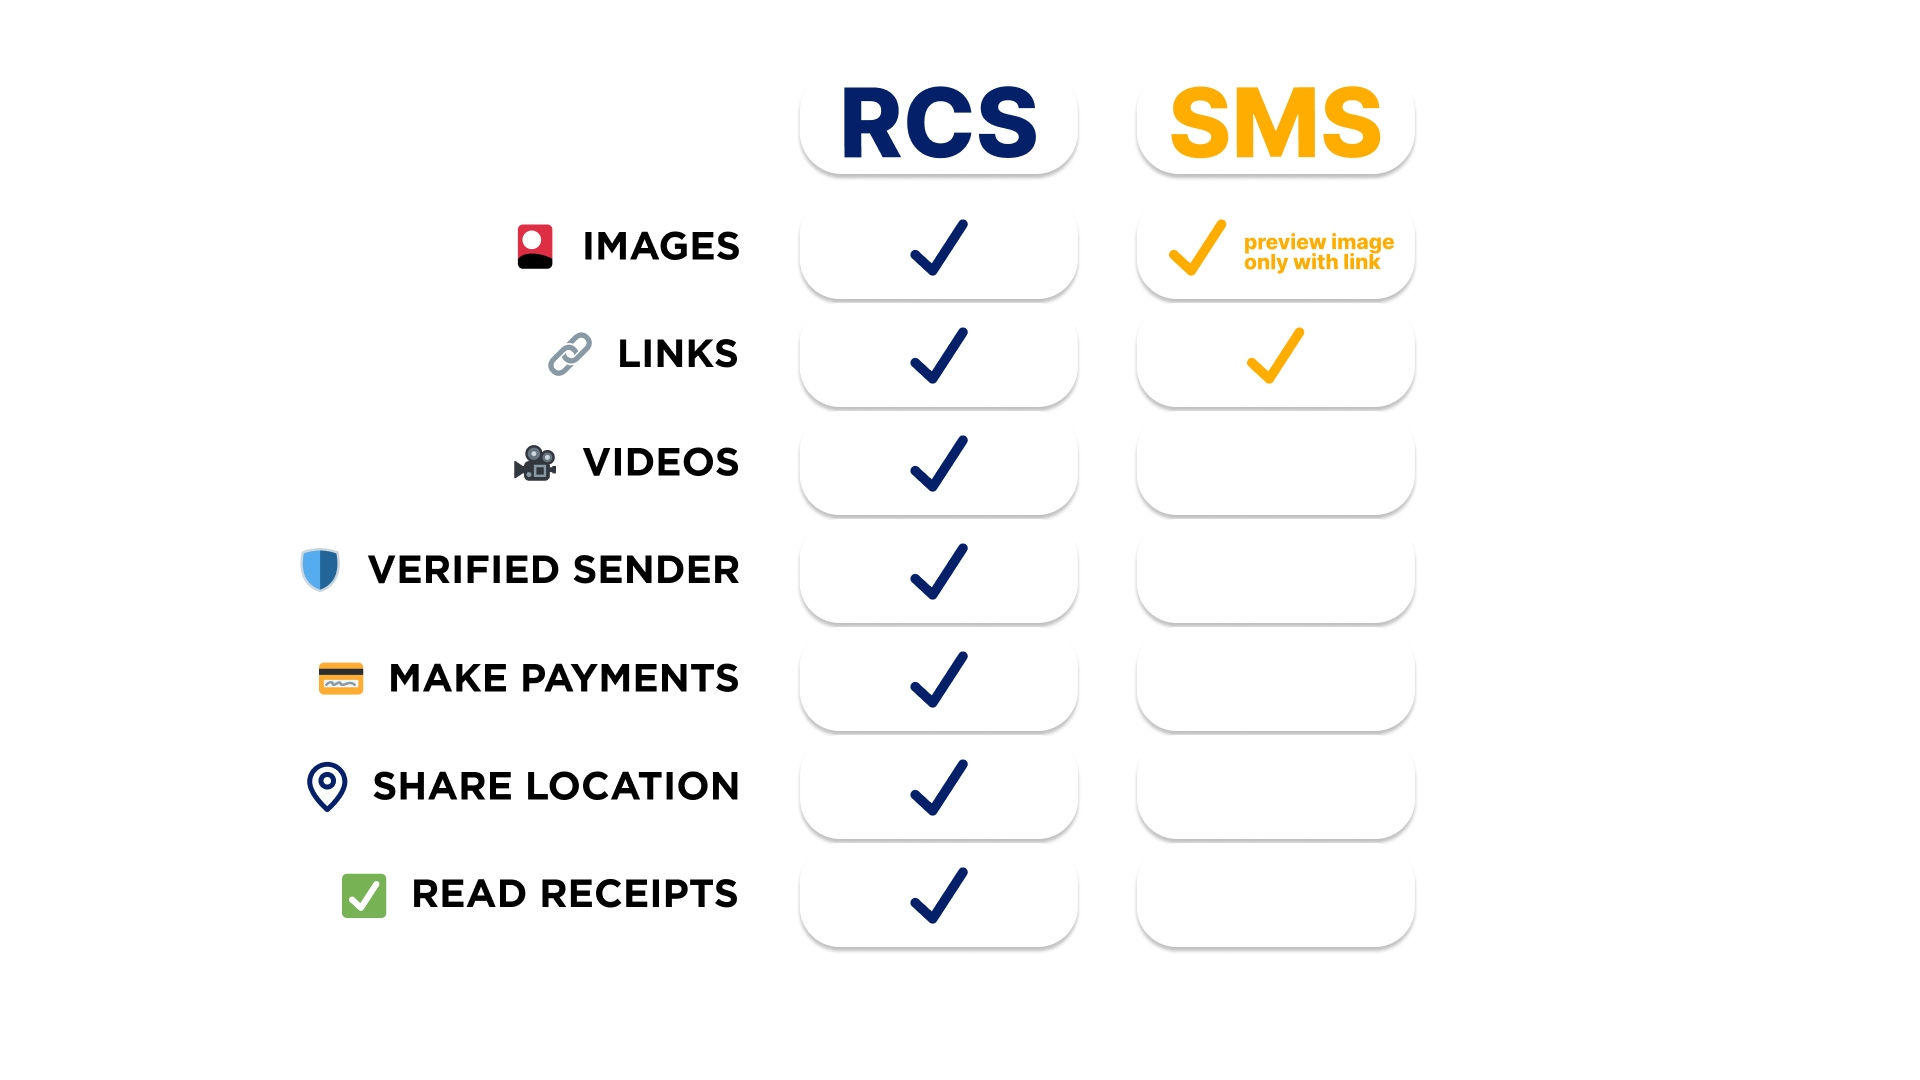 Comparison of SMS and RCS